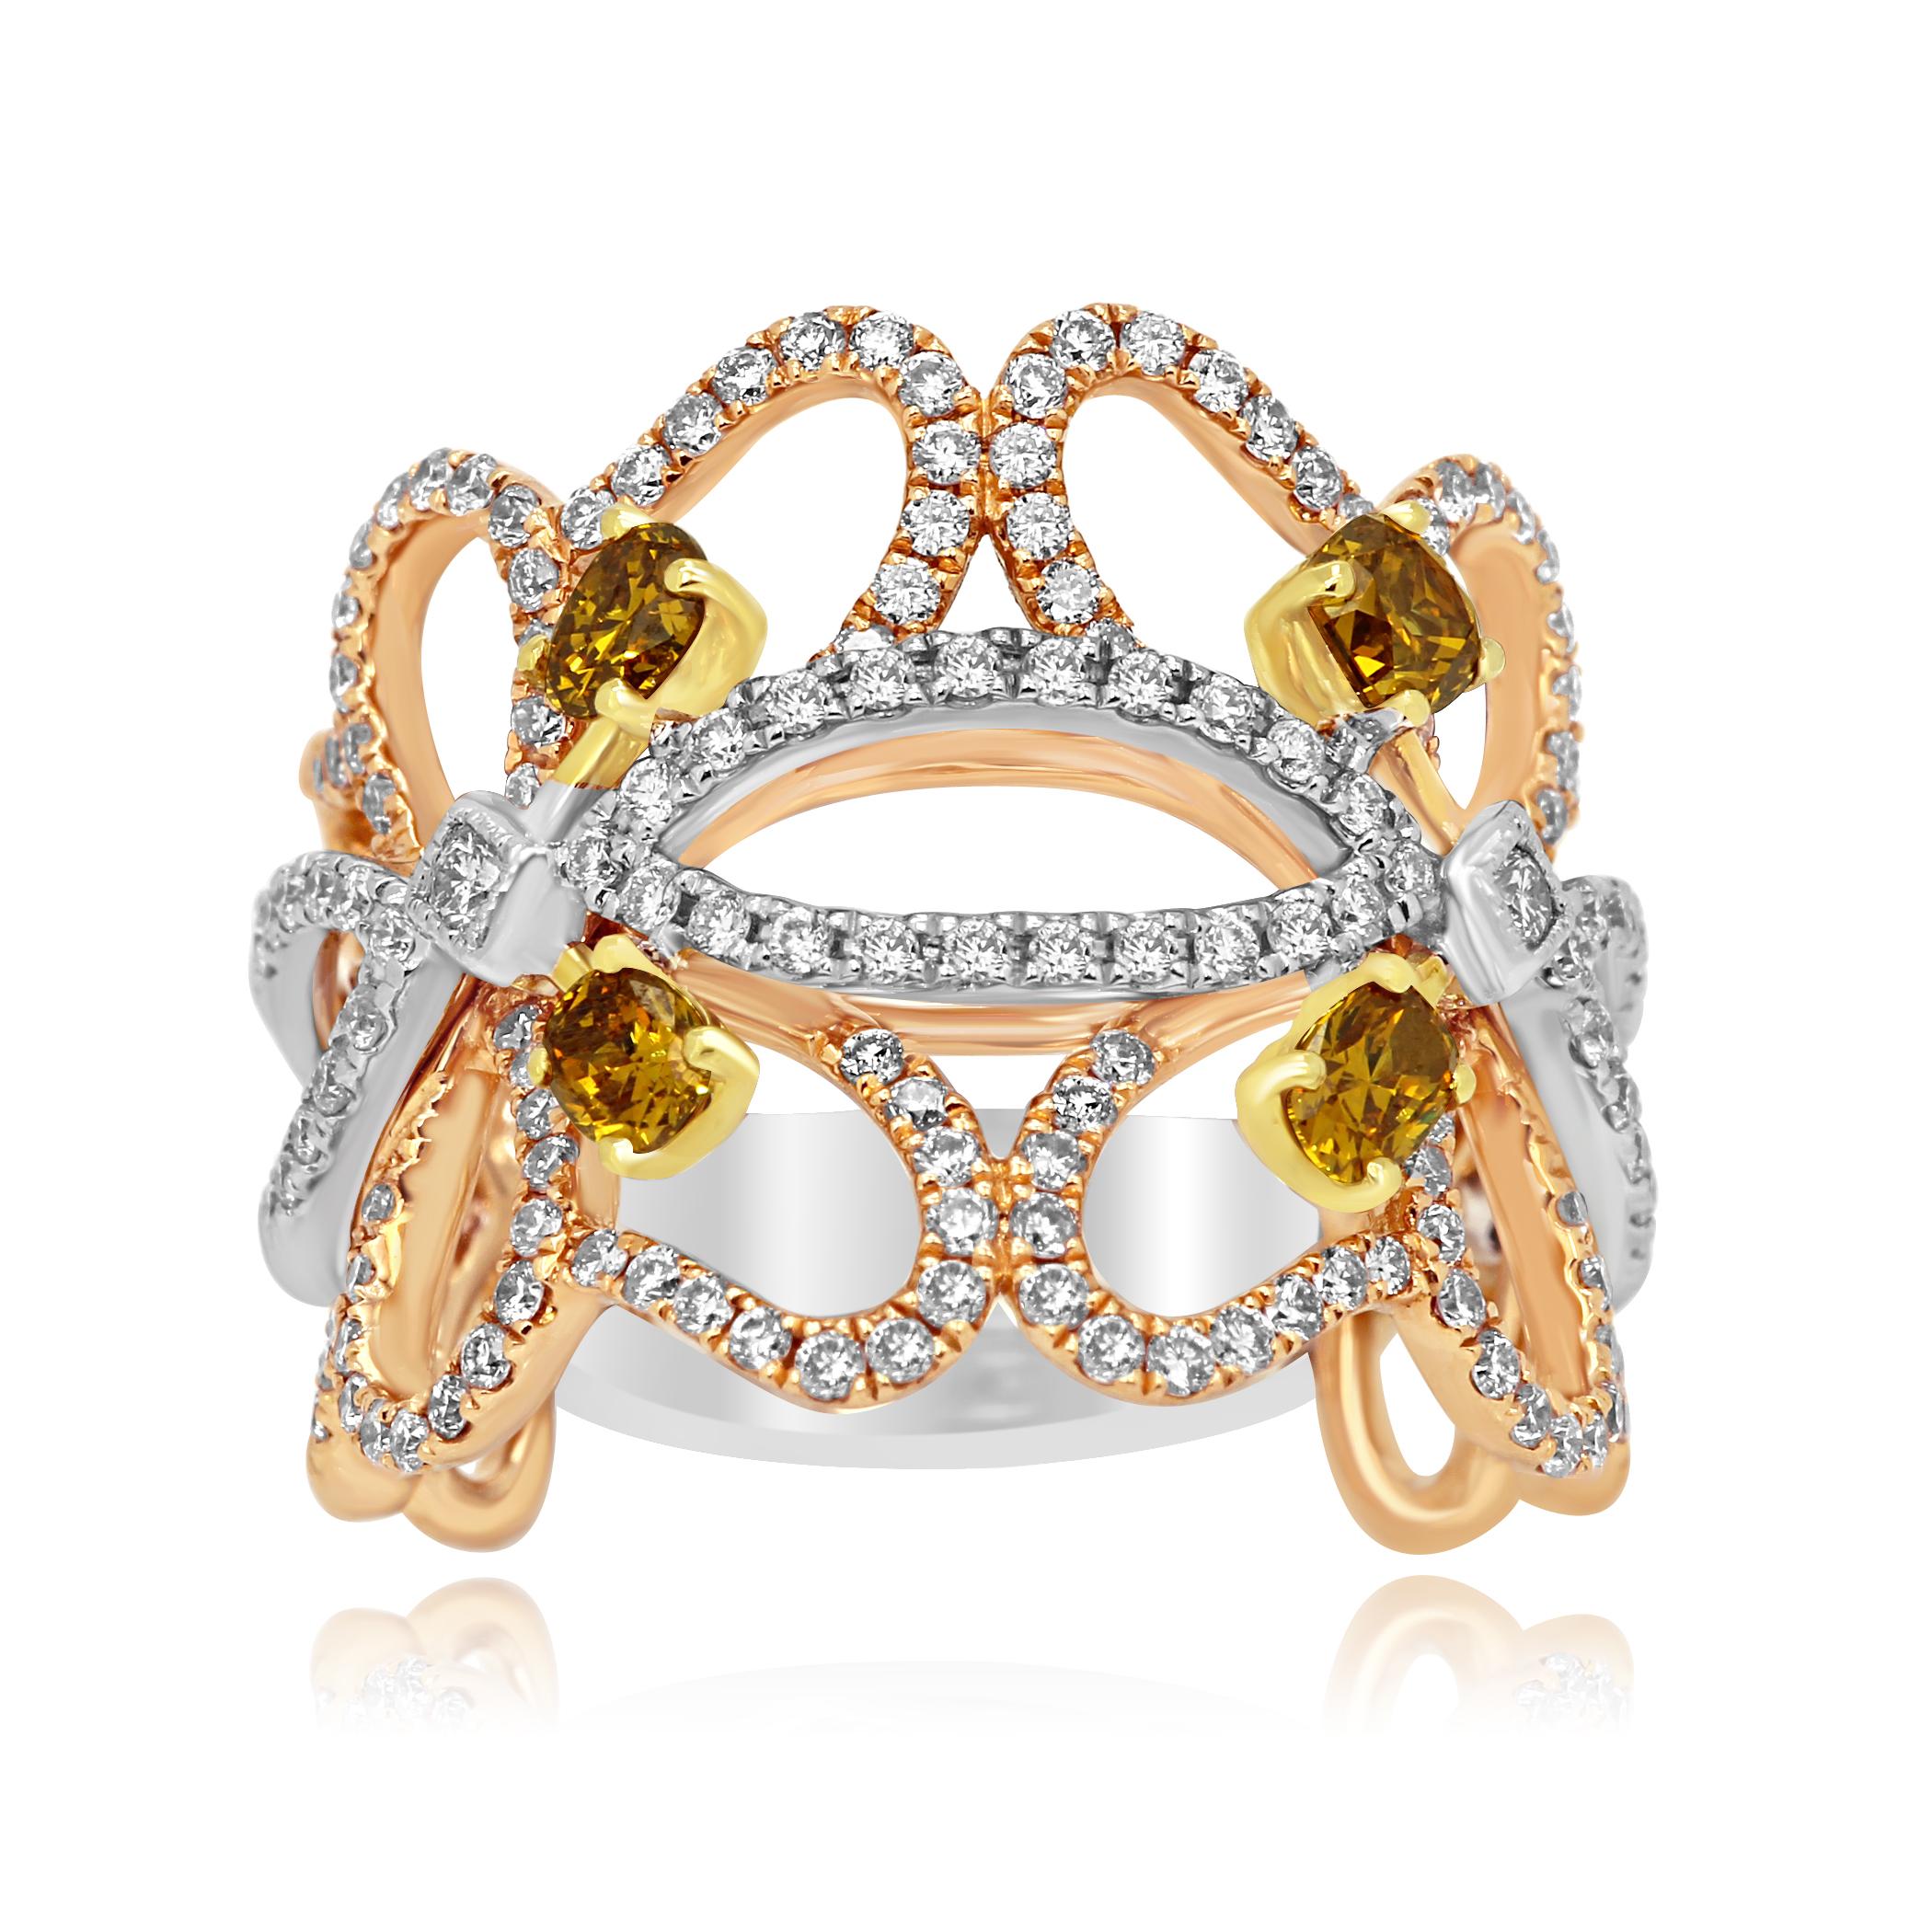 4 Natural Fancy Orange Yellow cushion diamonds 0.47 carat set with natural Pink Round Diamonds 0.60 Carat and white diamonds rounds 0.26 Carat in 18K White, Yellow and Rose Gold Fashion Cocktail Band Ring.